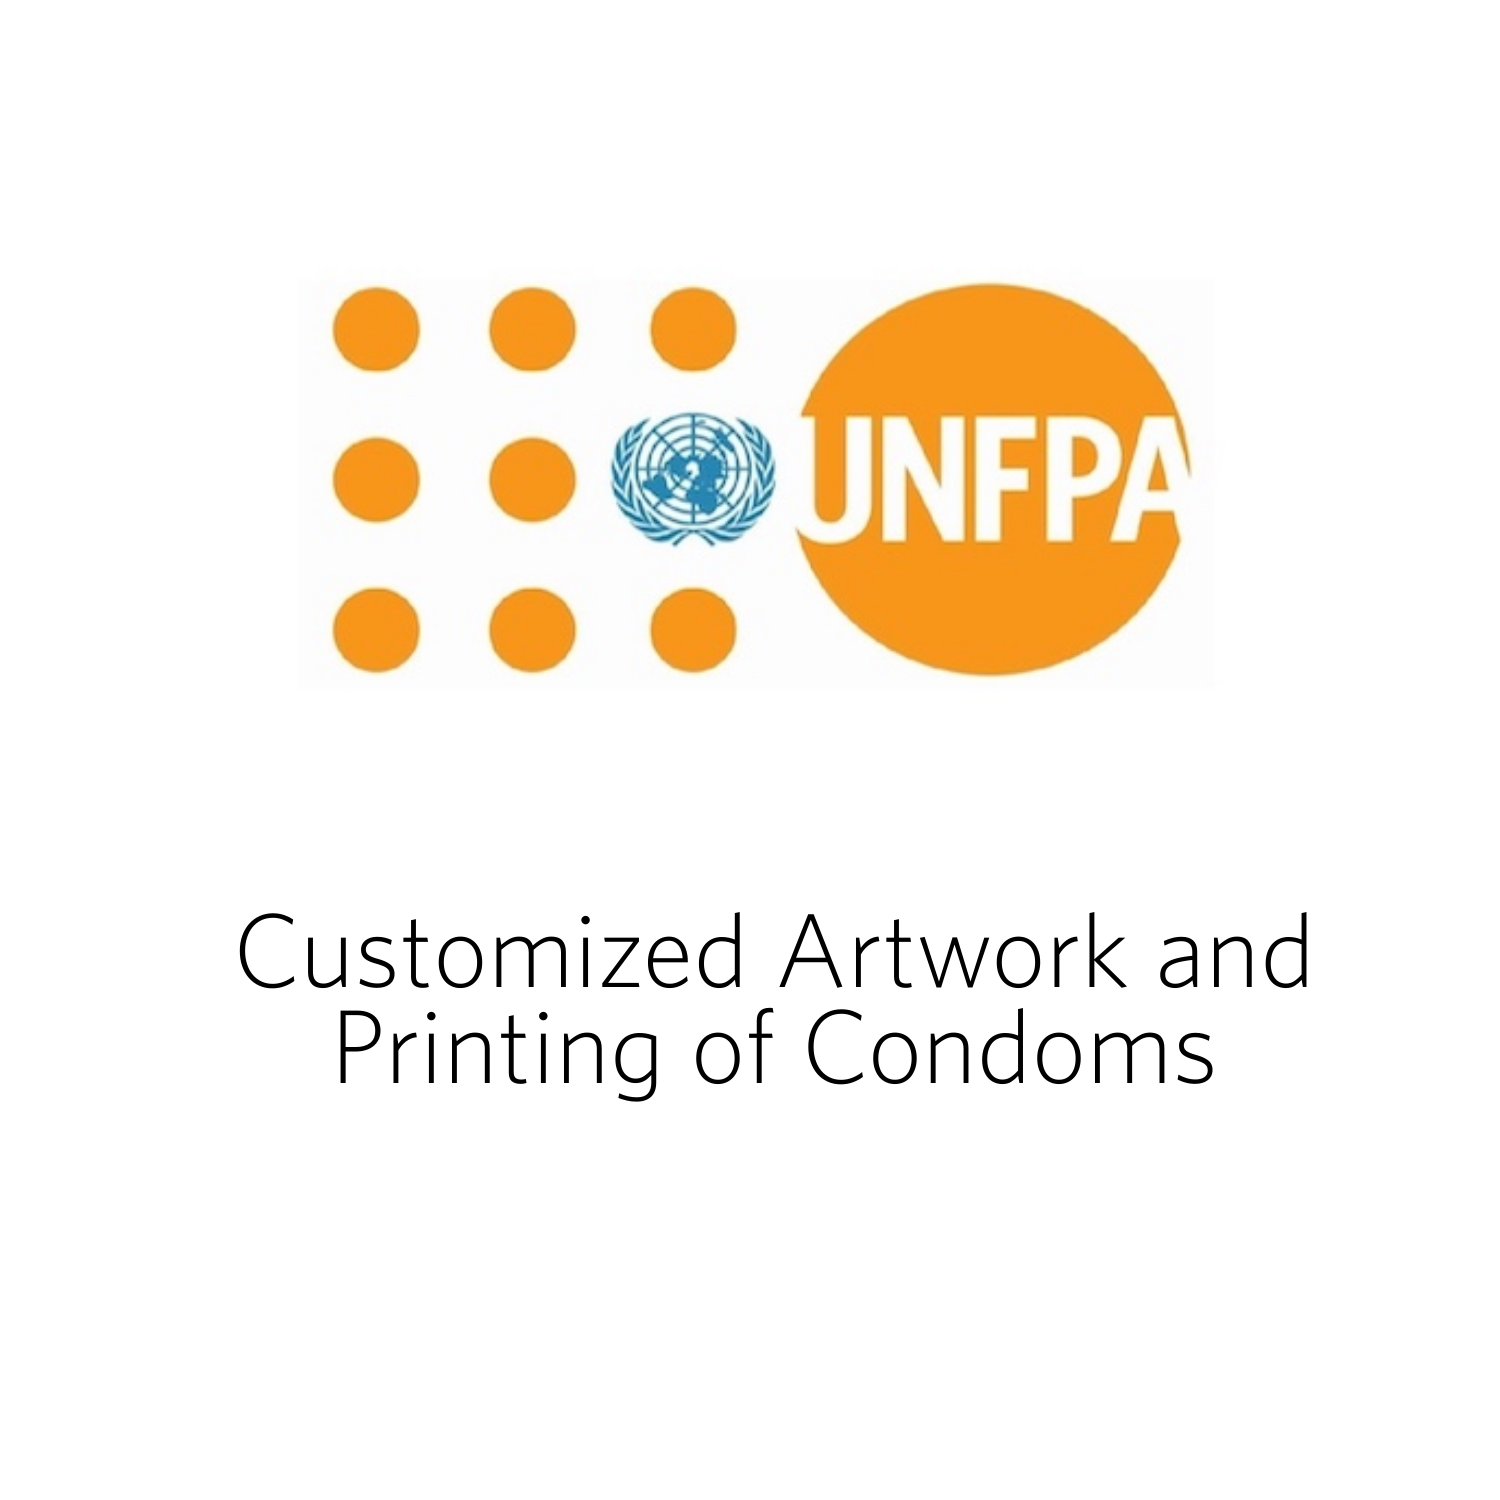 Customized Artwork and Printing of Condoms